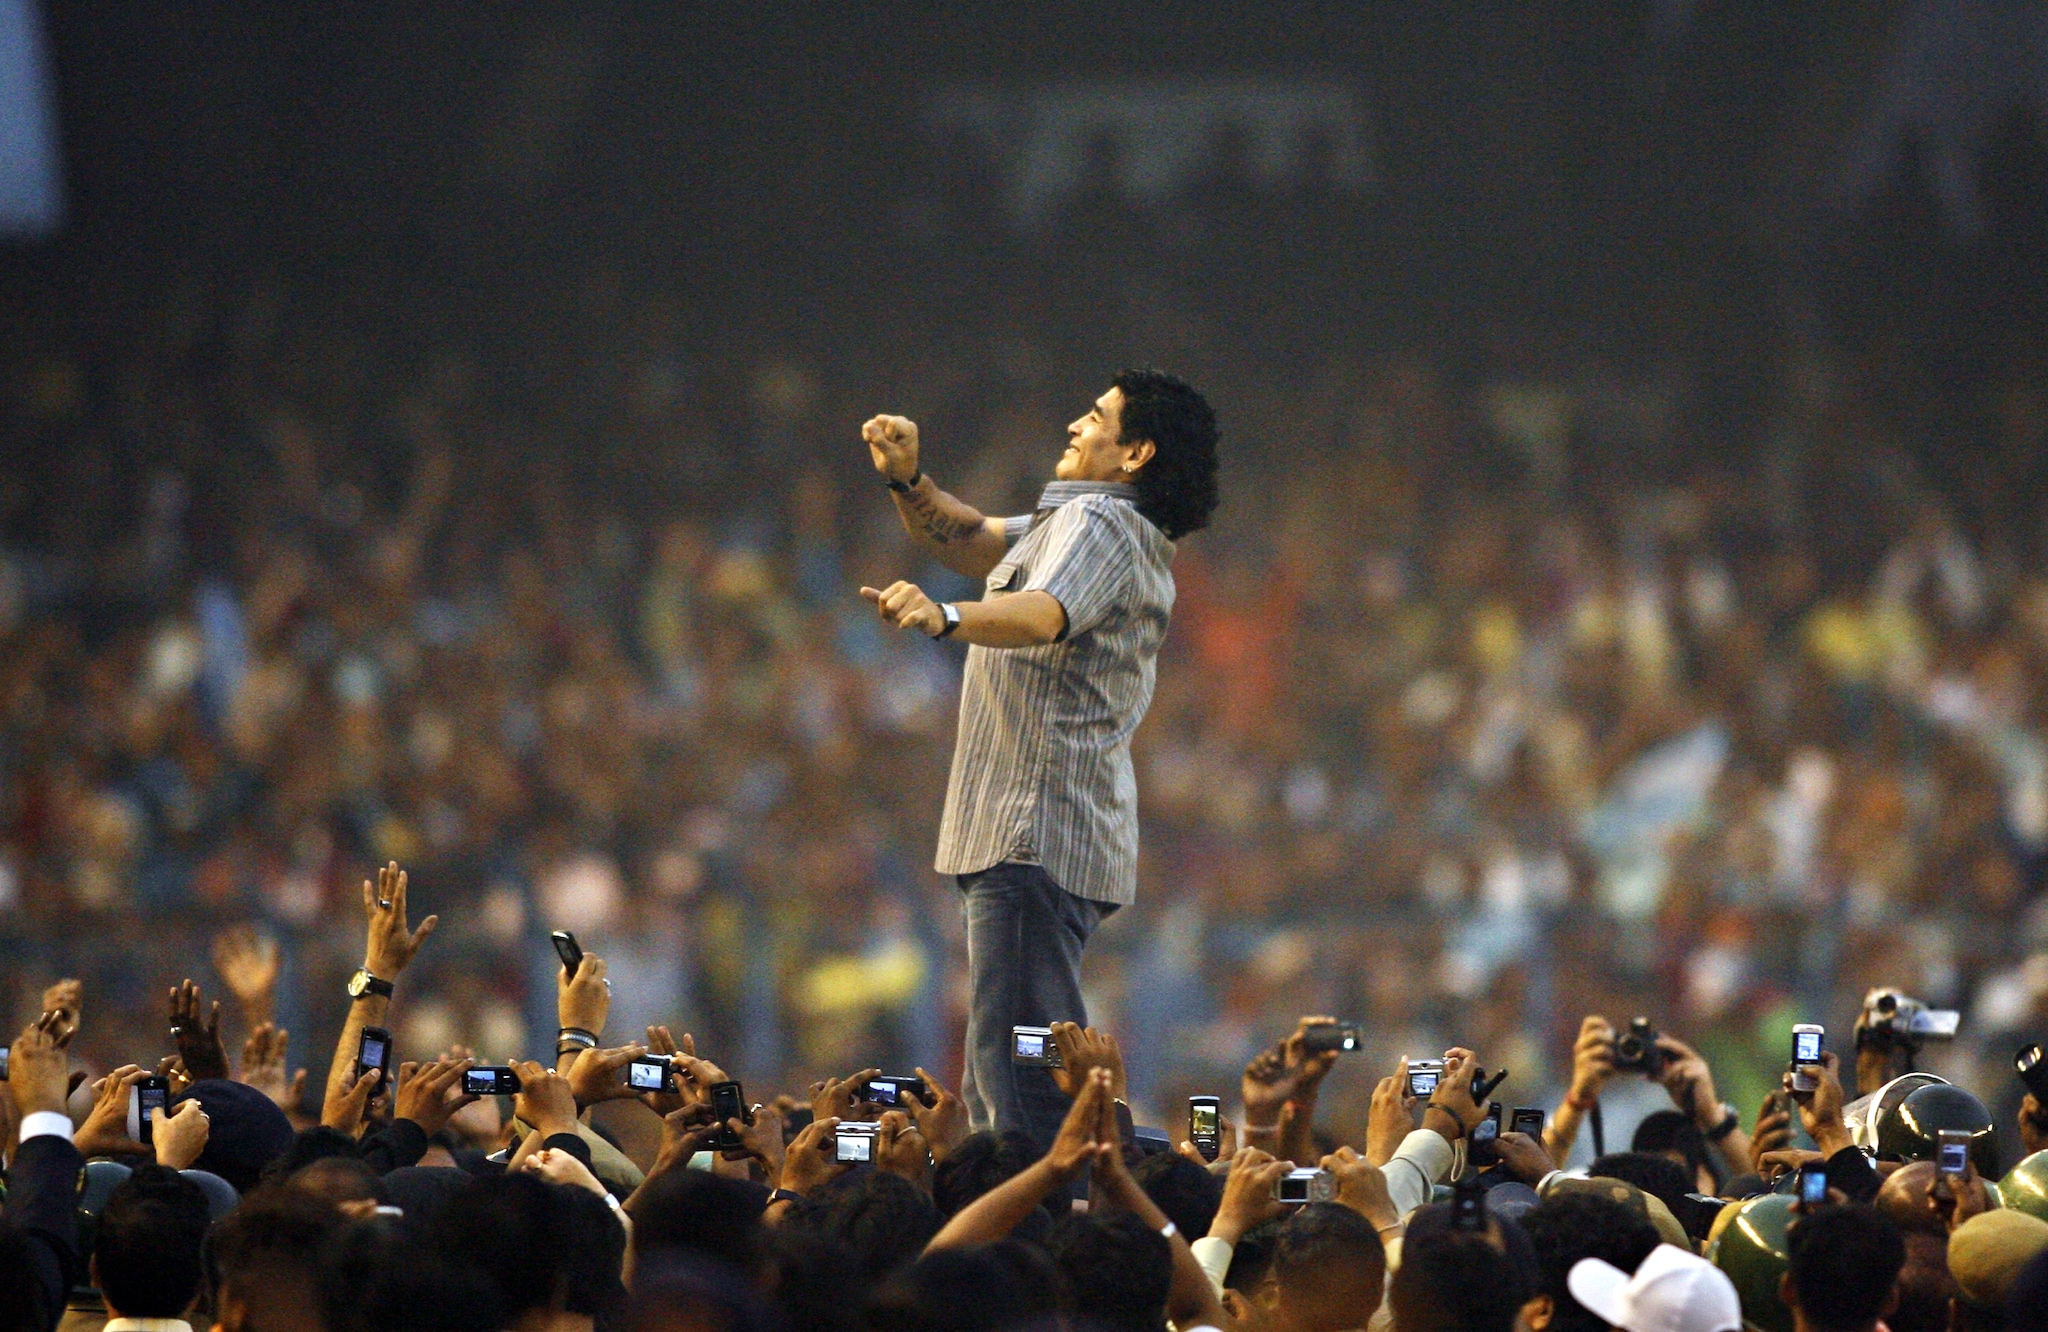  Argentina's national team coach and former football star Diego Armando Maradona gestures as he attends a felicitation programme at Salt Lake Stadium in Kolkata on December 6, 2008. Soccer superstar Diego Maradona said he was greatly touched by the frenzy over his brief visit here and promised to come back to India again in future. (Photo: AFP)